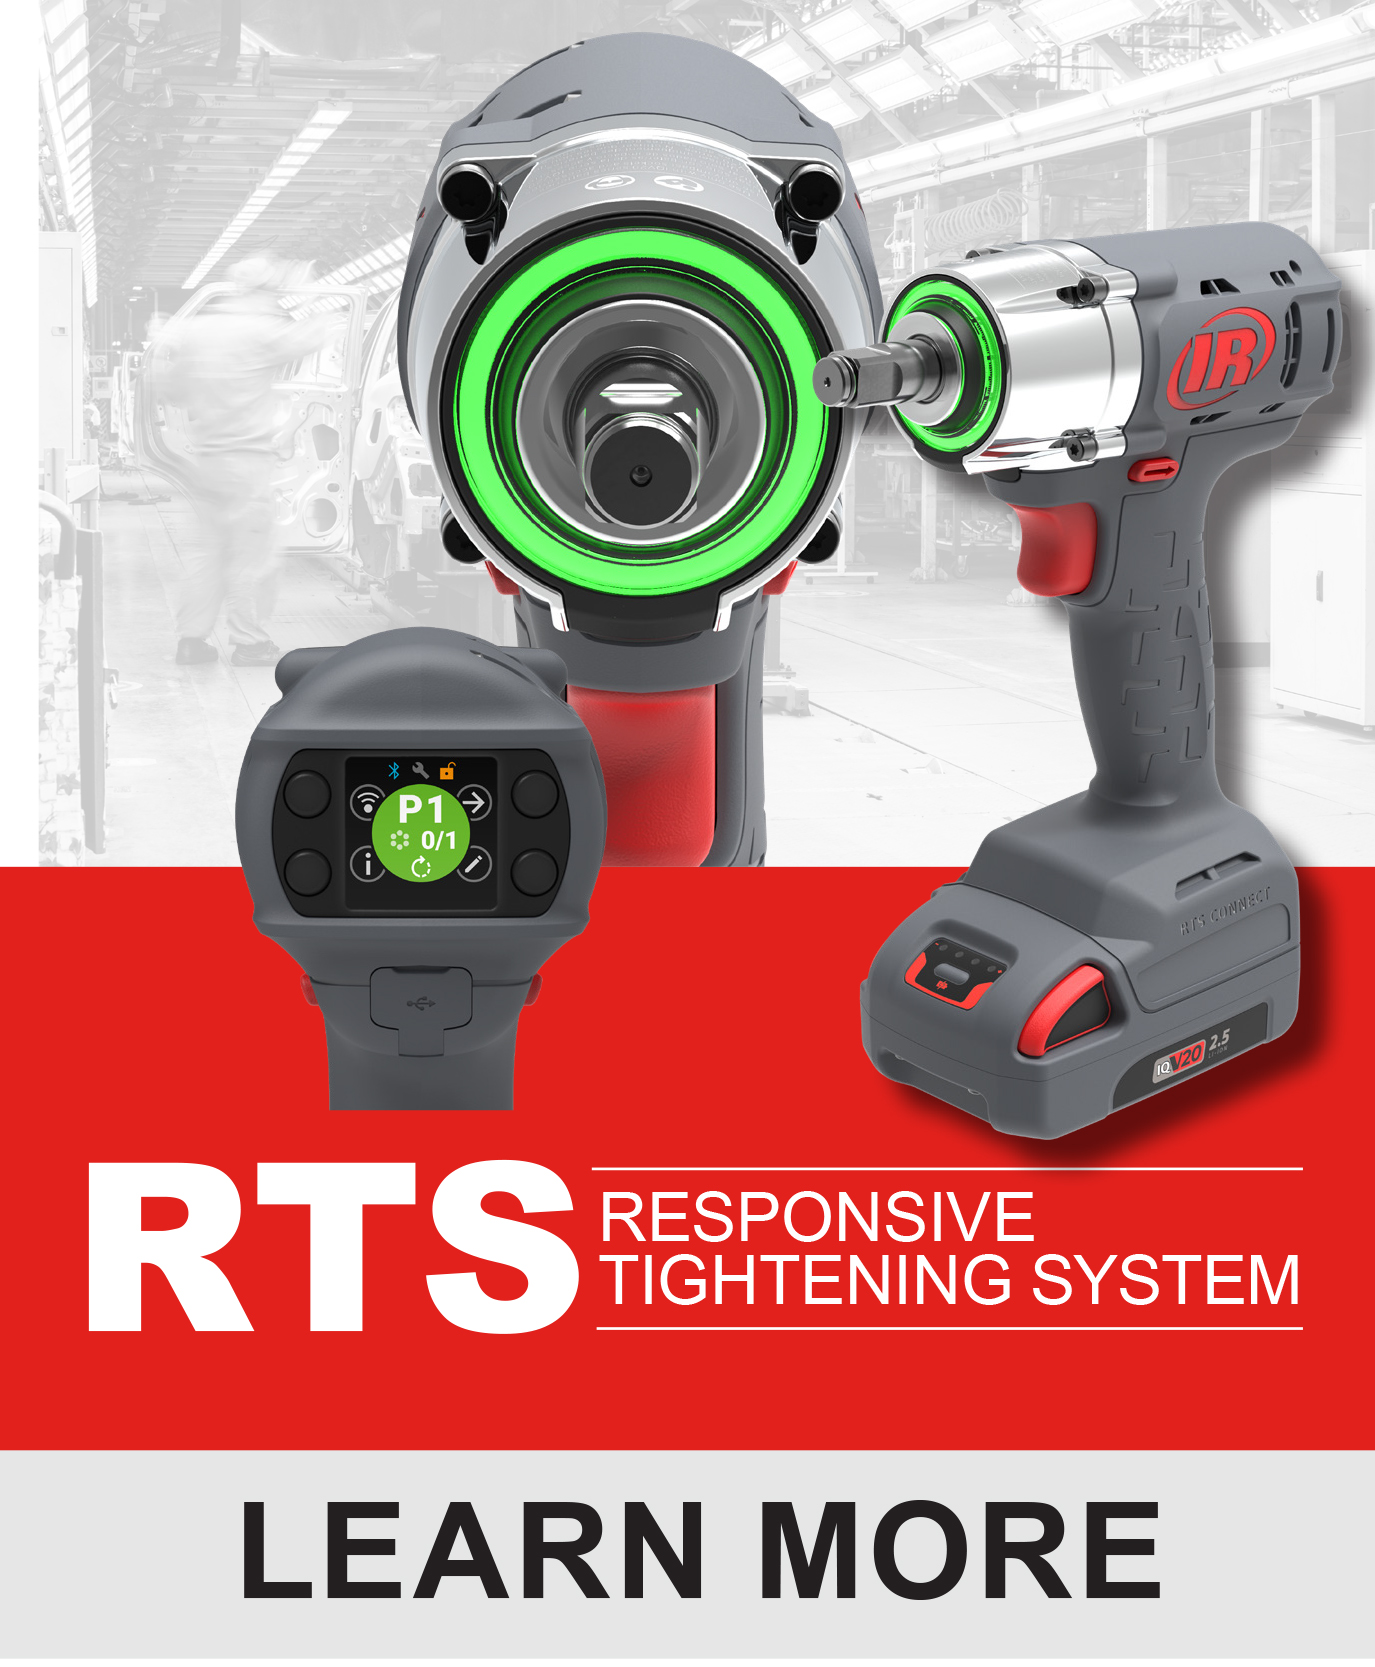 RTS Connect is a smart and simple solution that is changing the game in reliable fastening